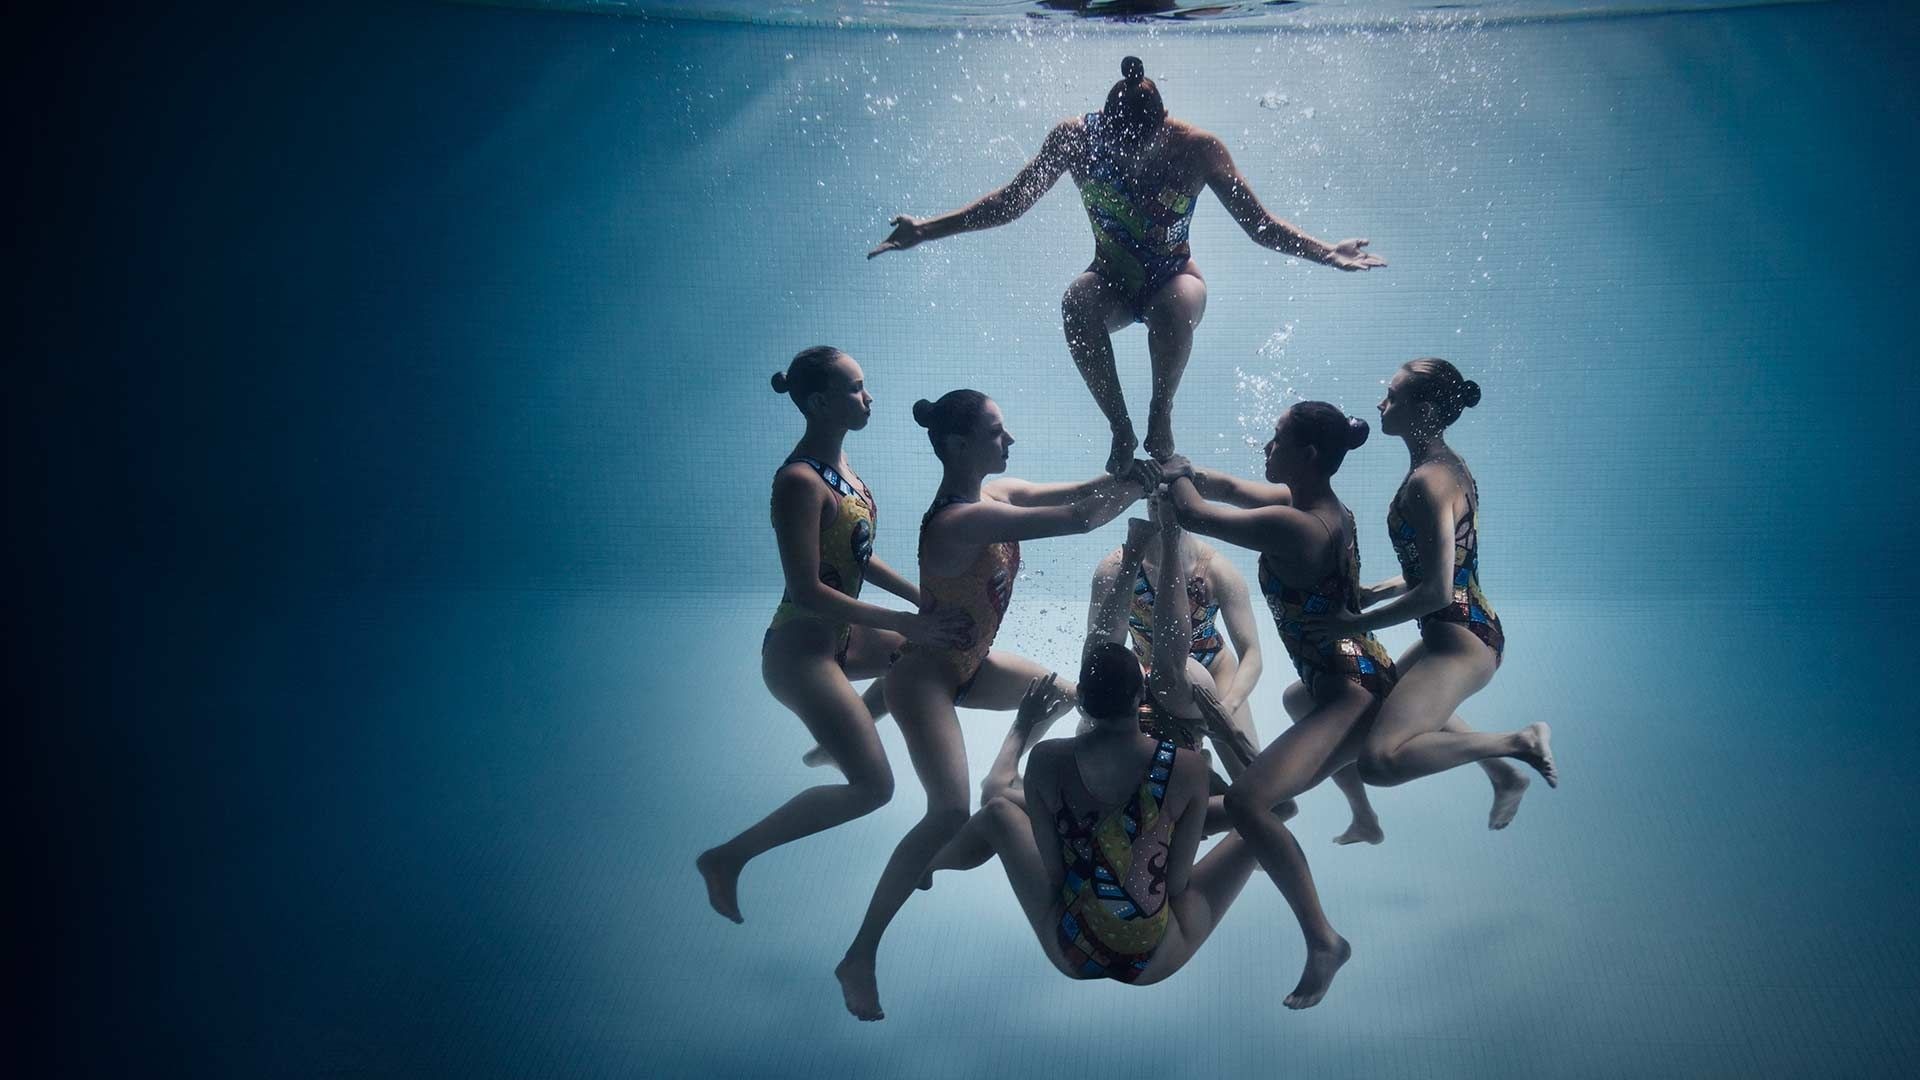 Synchronized Swimming: Underwater element of an artistic performance, Competitive water sports discipline. 1920x1080 Full HD Wallpaper.